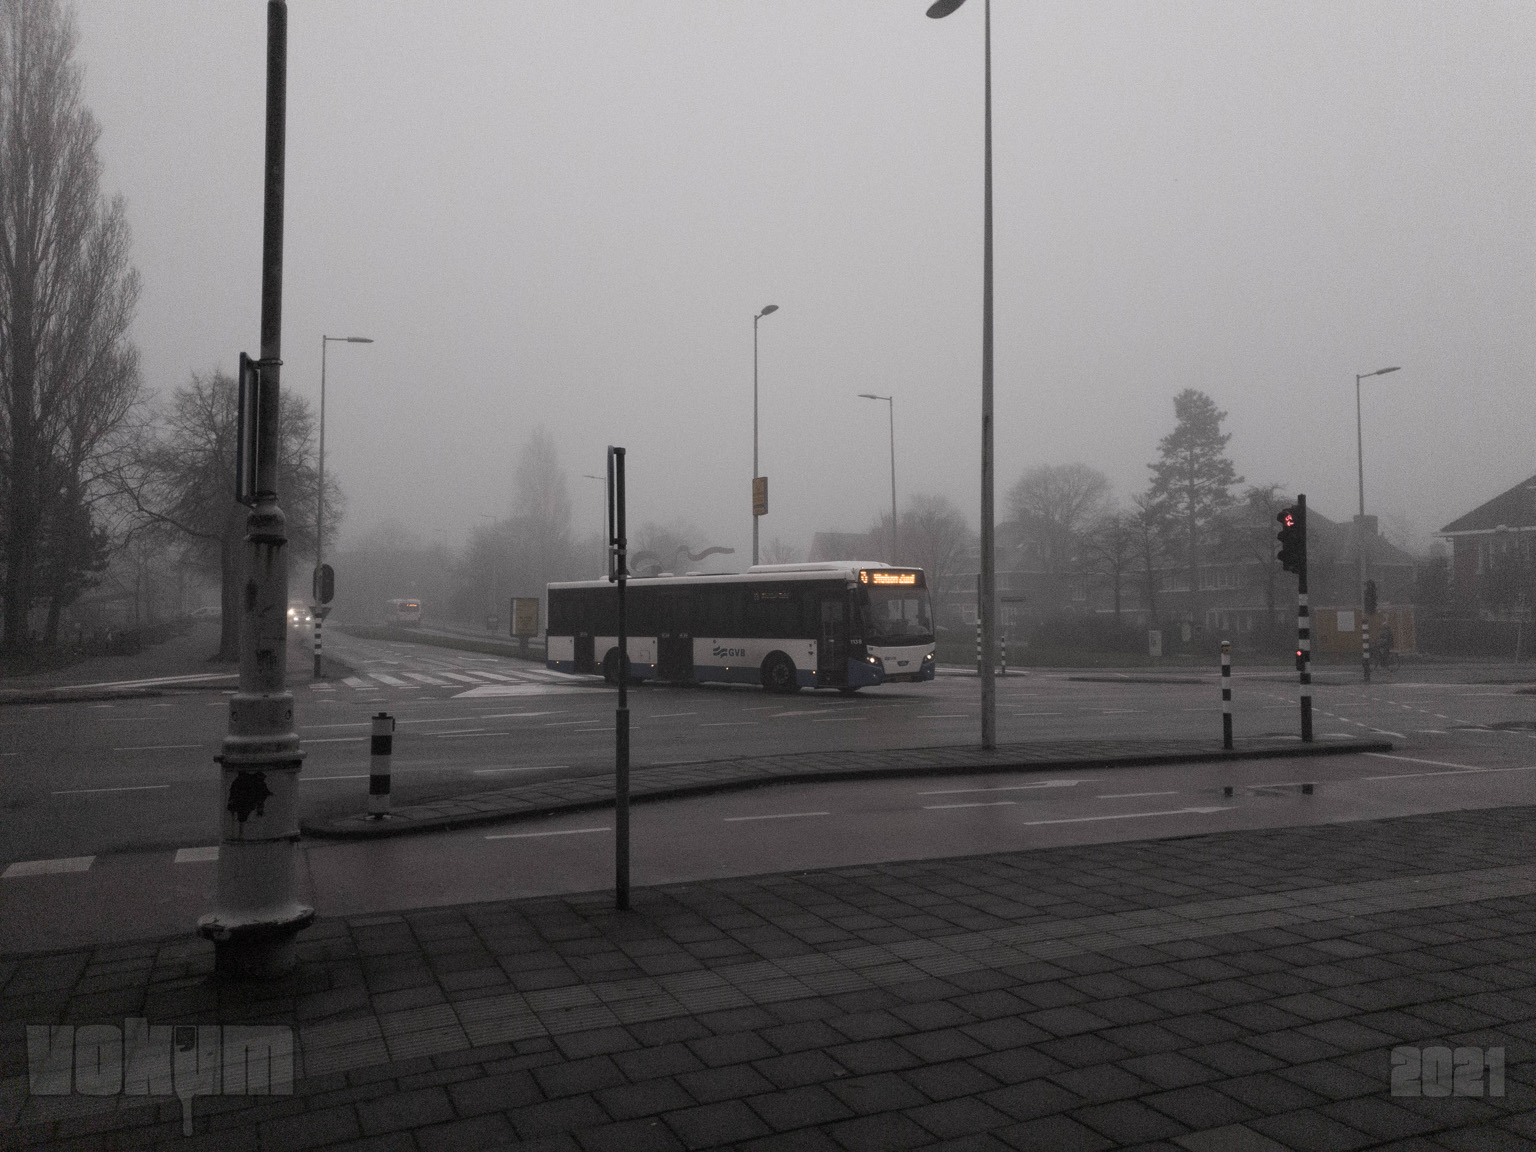 Misty Amsterdam (zuid). Crossing Apollolaan and Stadionweg. A public transport bus takes a turn.